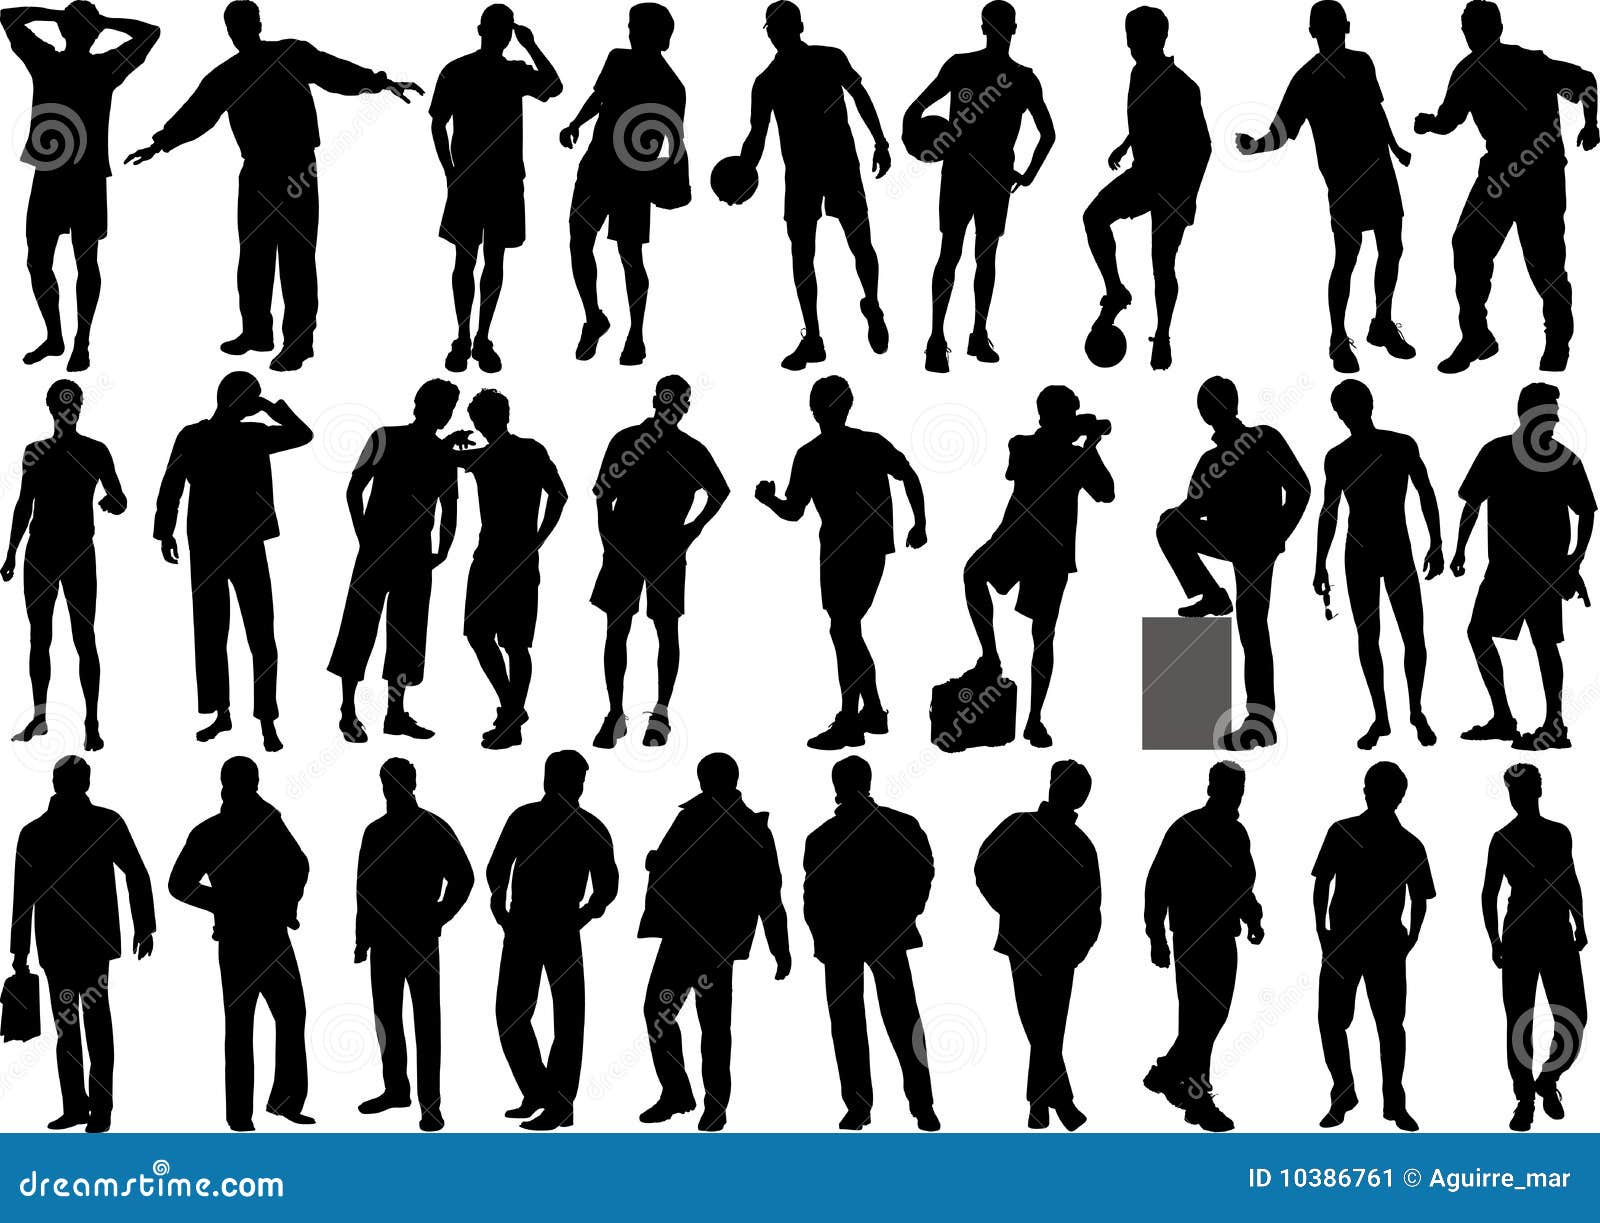 Human Figures High Quality Stock Vector Illustration Of Dance Exercise 10386761